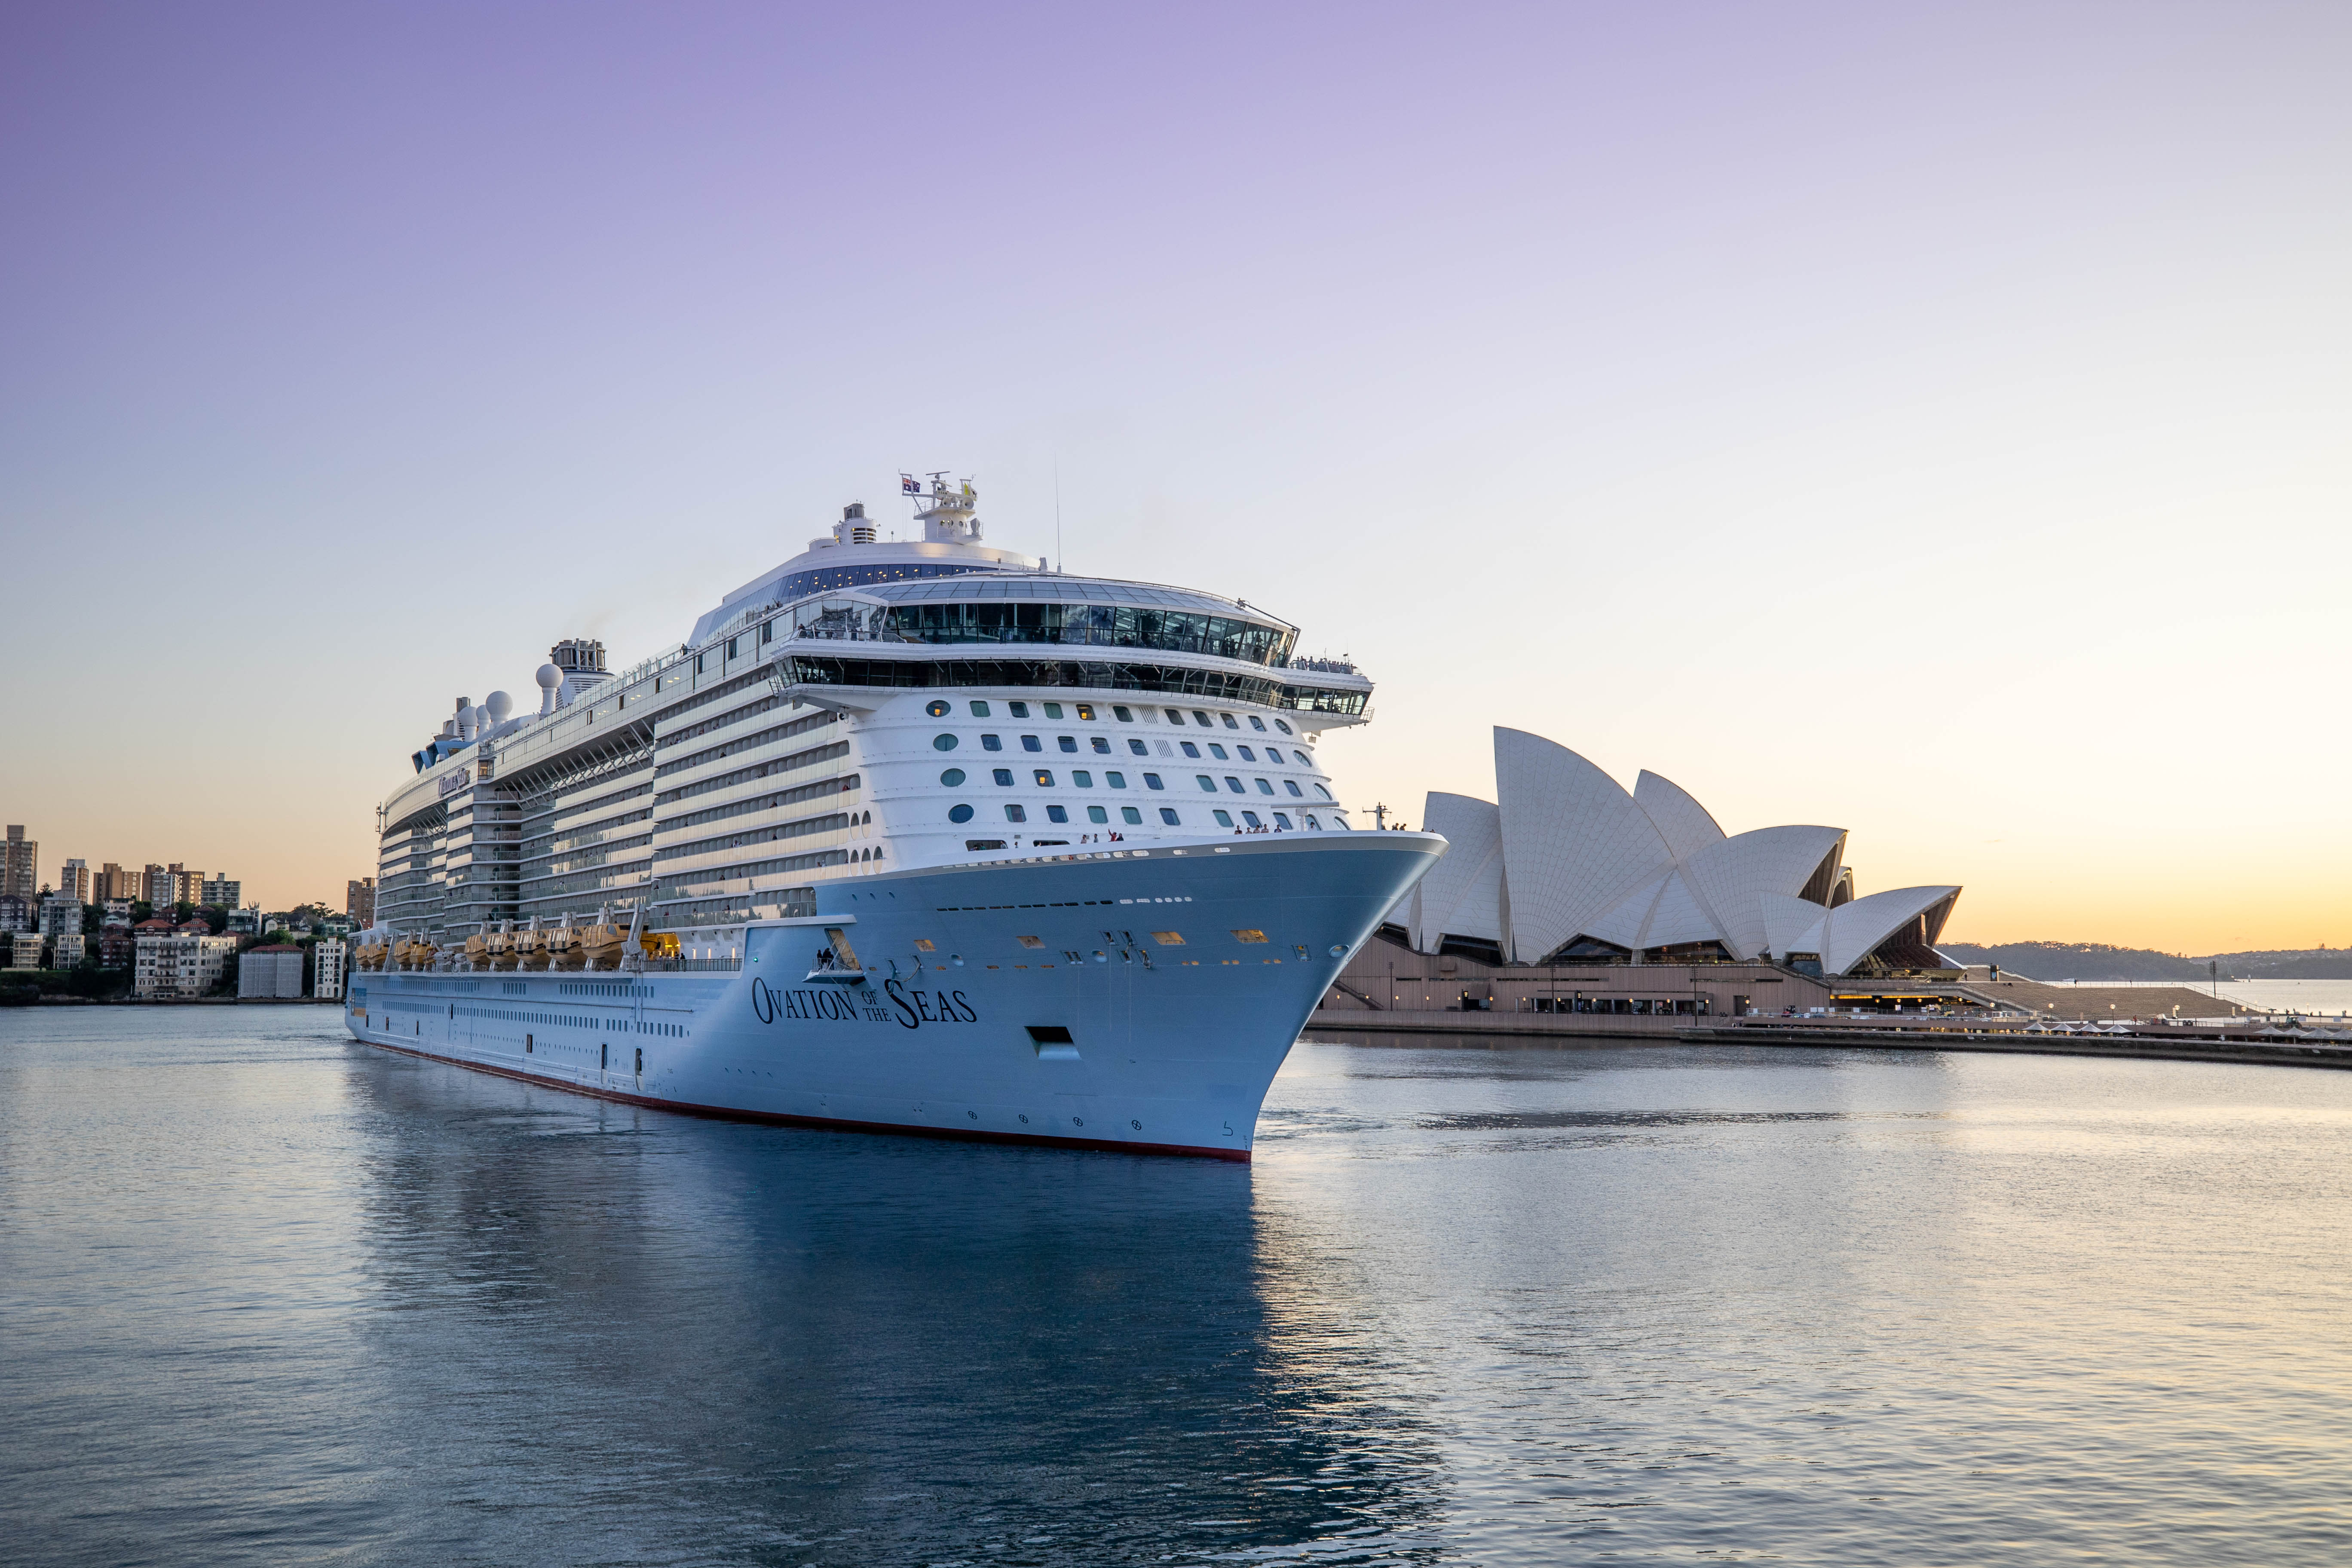 Ovation of the Seas is just one of the six Royal Caribbean ships that caters to solo travellers